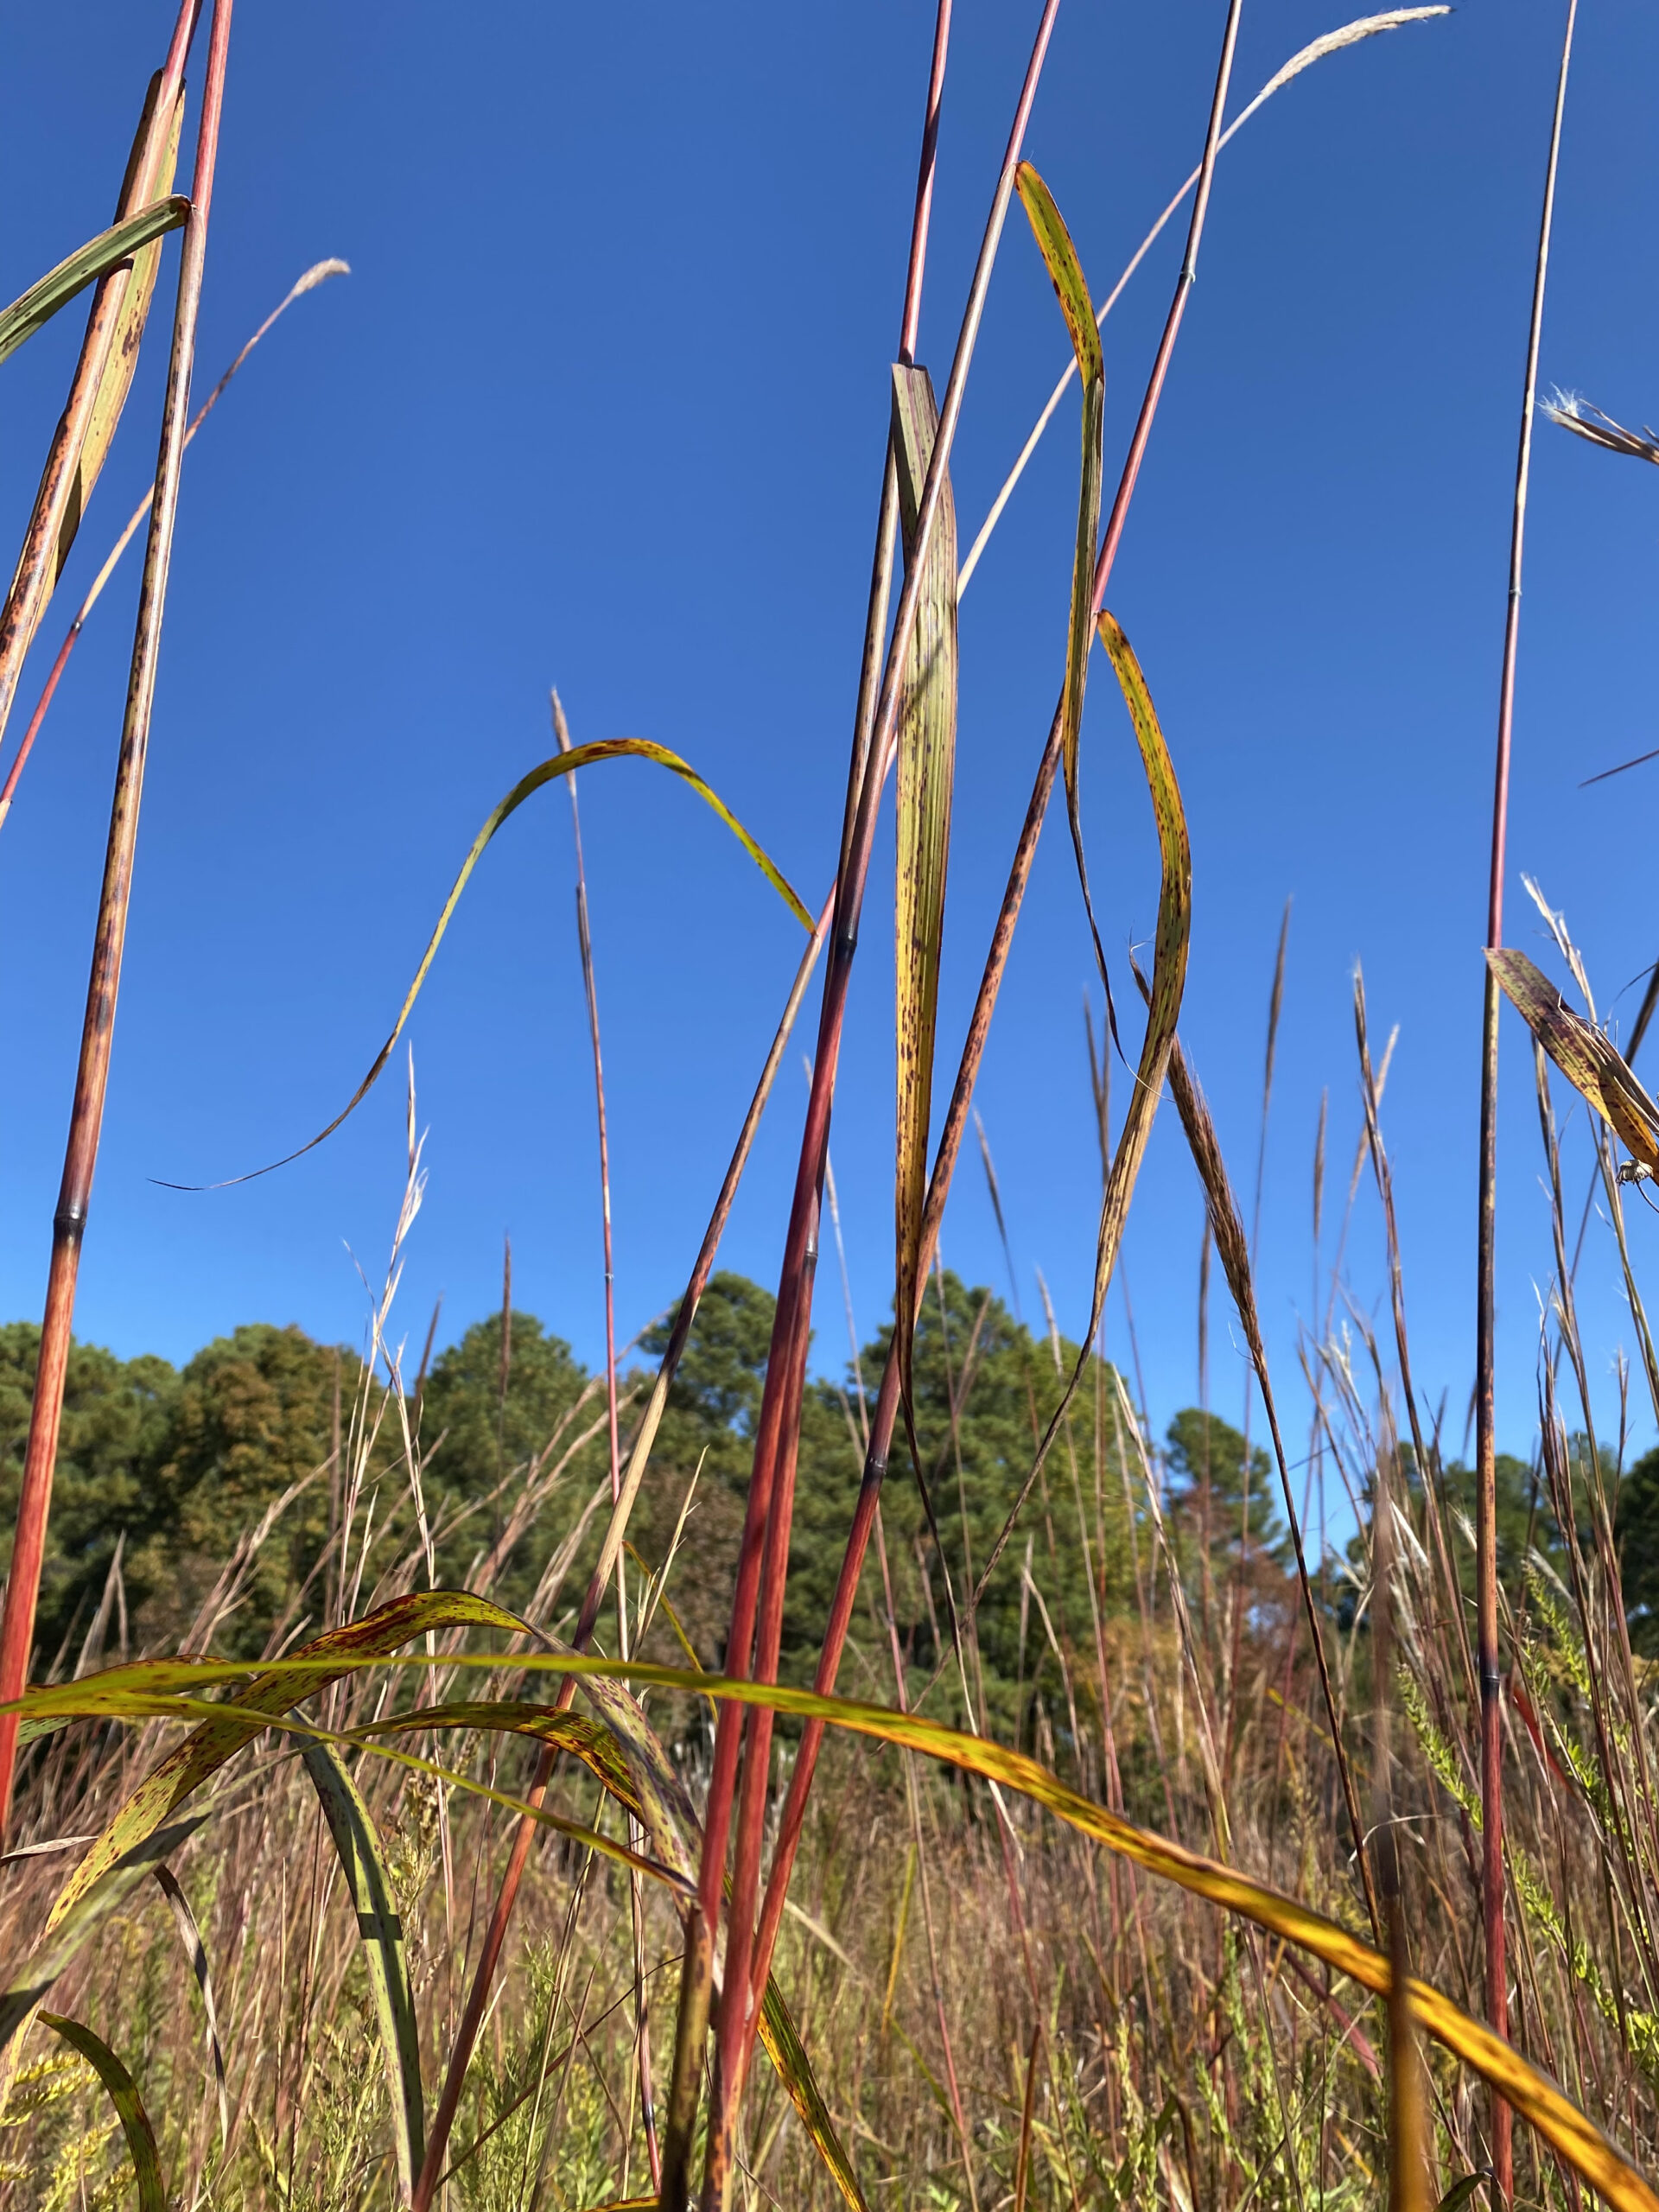 Silver Plume Grass, Erianthus alopecuroides, turn hues of red, gold and copper in autumn. Their towering stalks give rich fall color to Georgia grasslands.